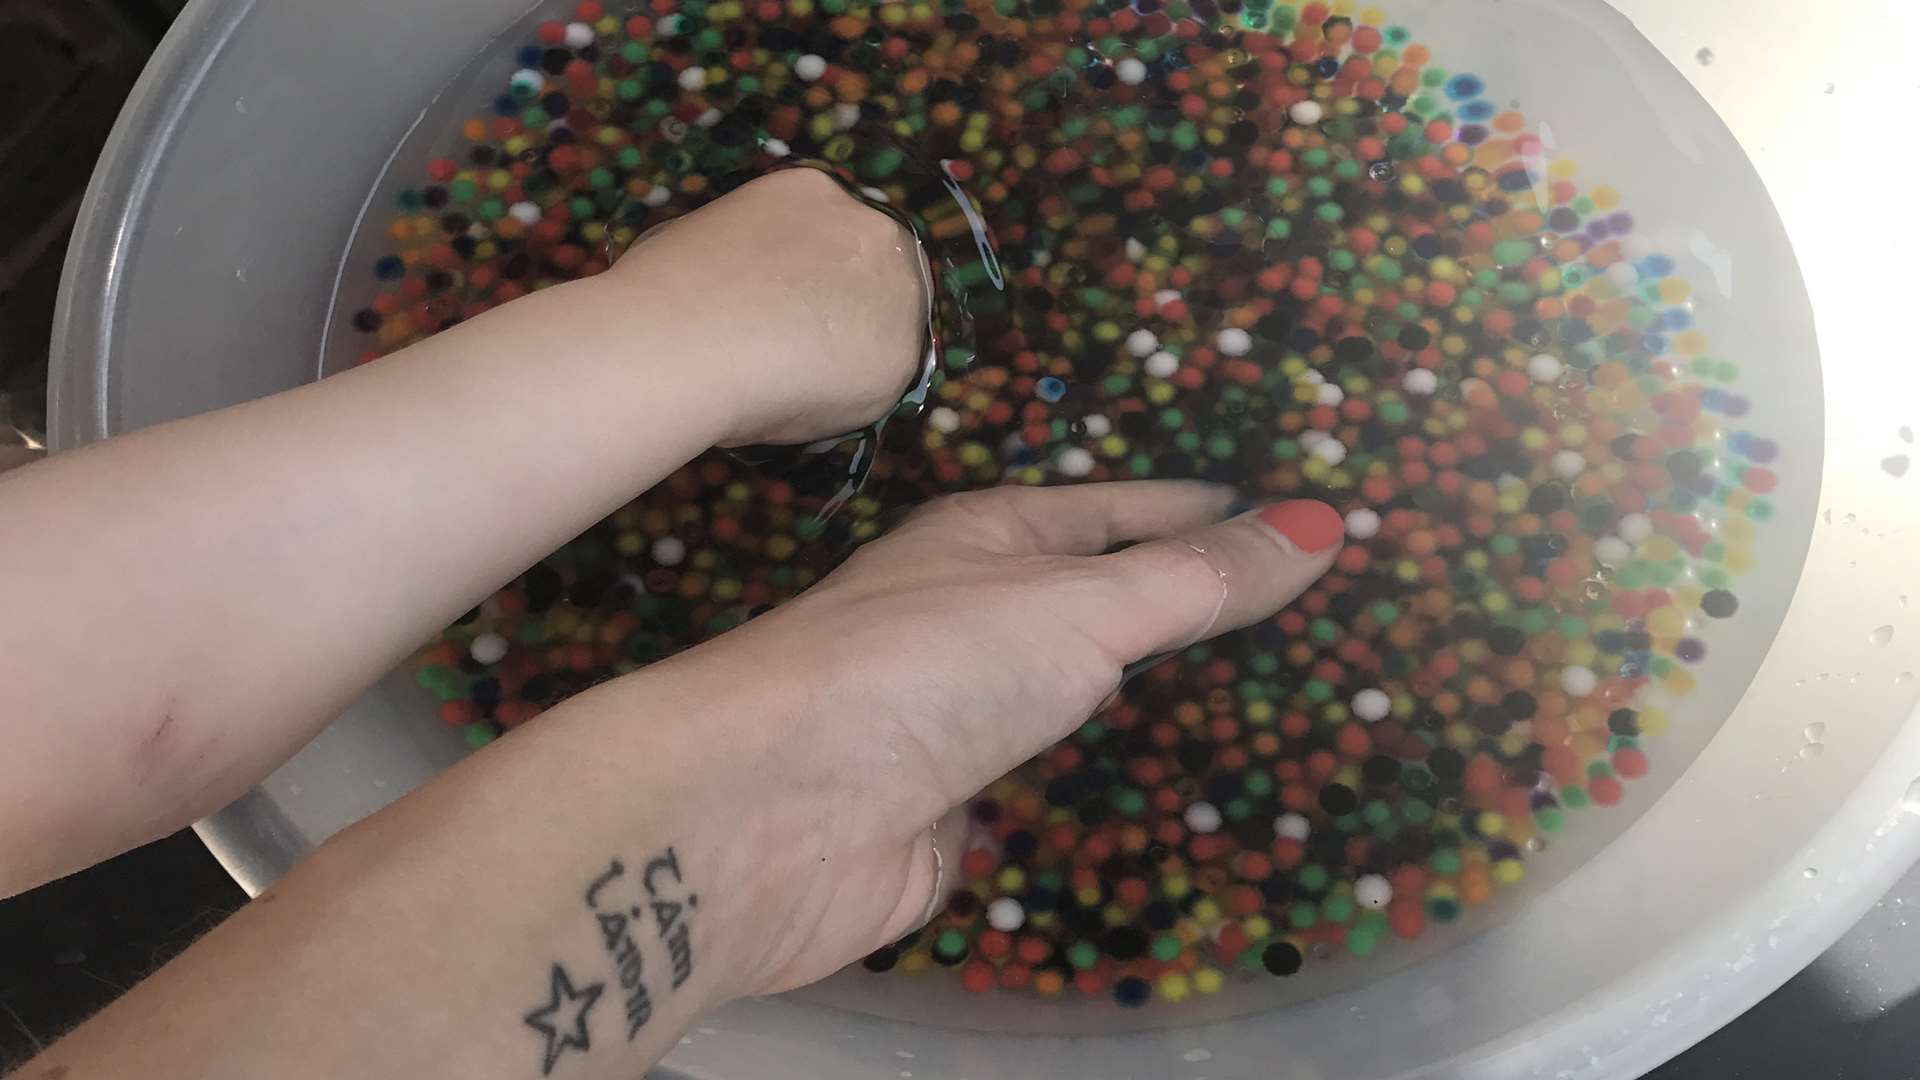 Water beads - squishy, bouncy, slimy and awesome to play with